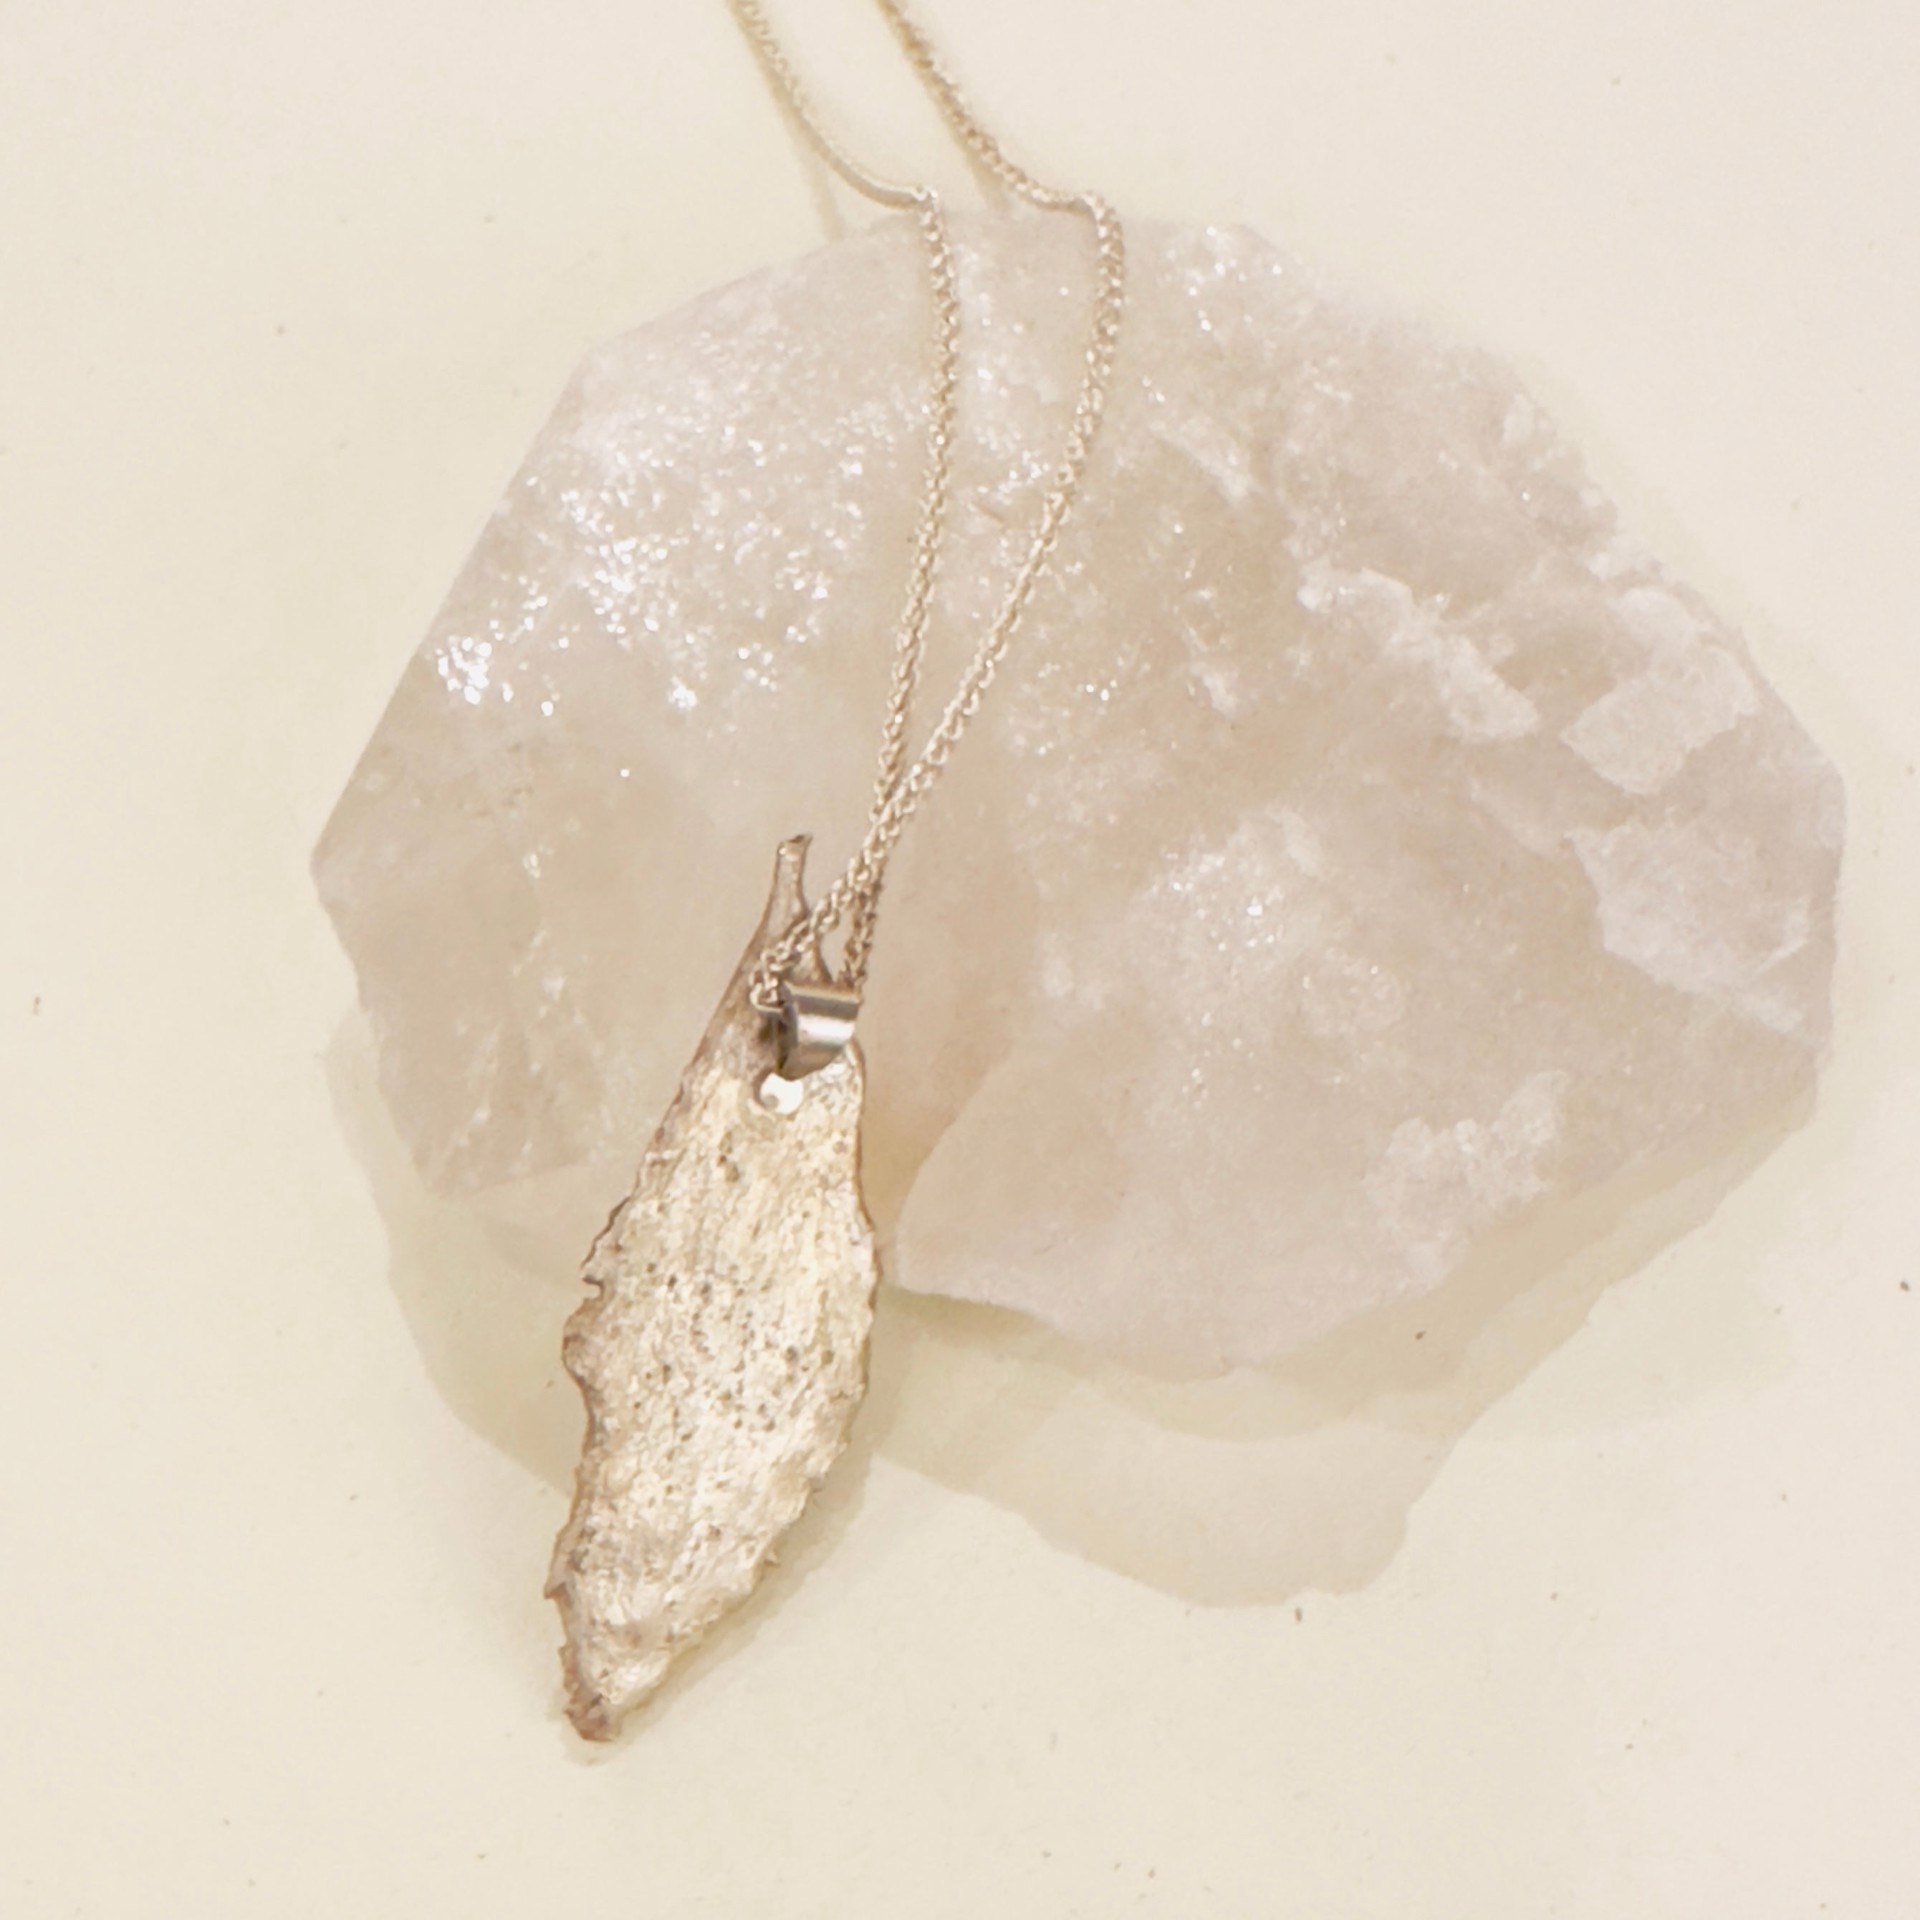 Silver Cast Tea Leaf Necklace by Clementine & Co. Jewelry